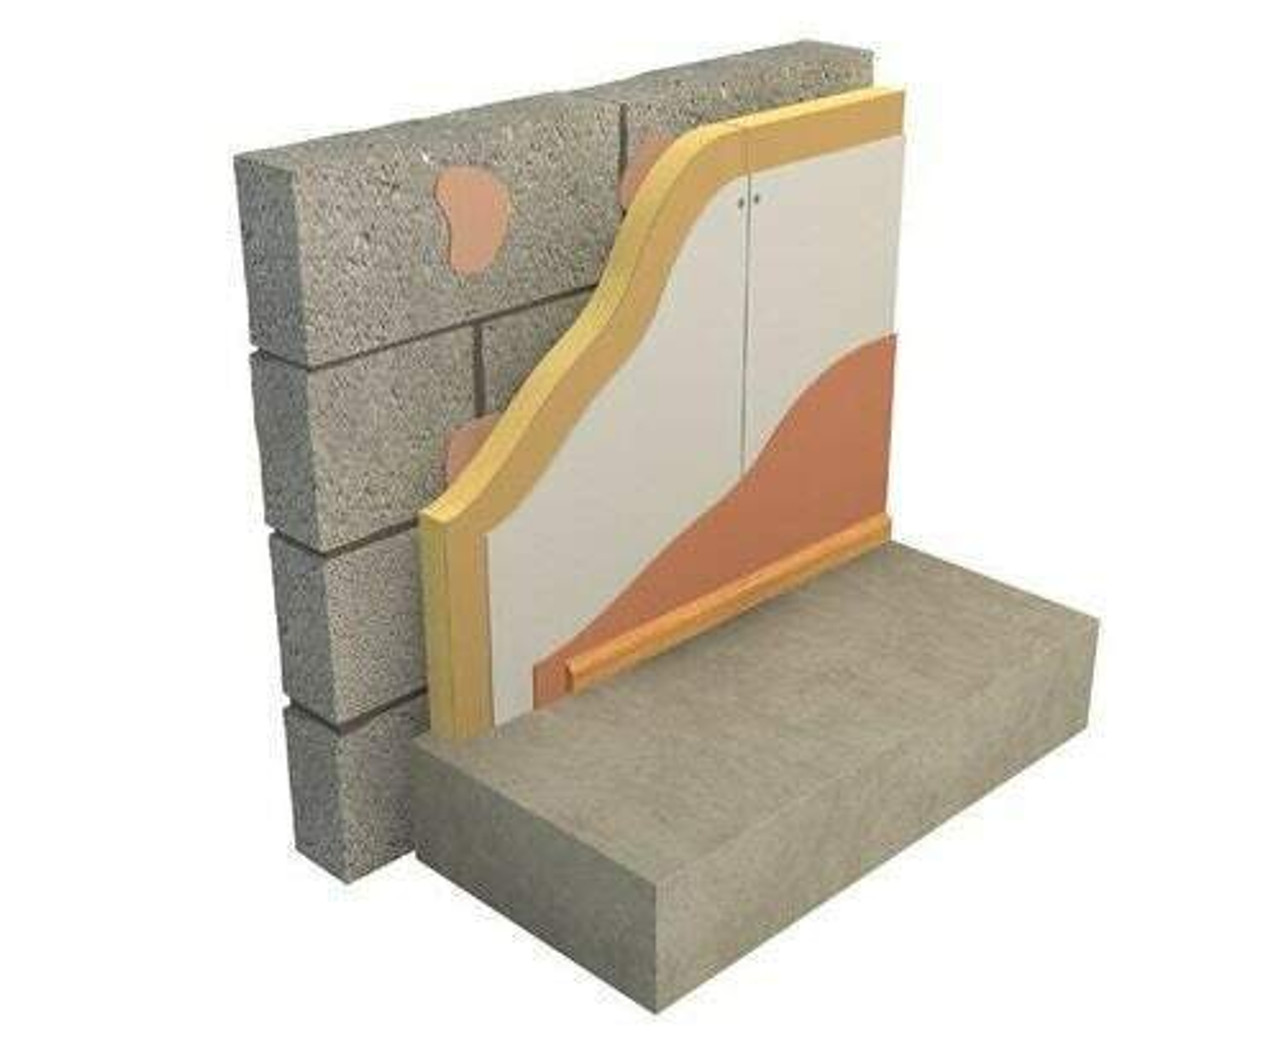 37.5mm- EcoTherm Eco-Liner Rigid PIR Dry Lining Insulation Board - 2400mm x 1200mm x 37.5mm 100000012386-S ECO-50382